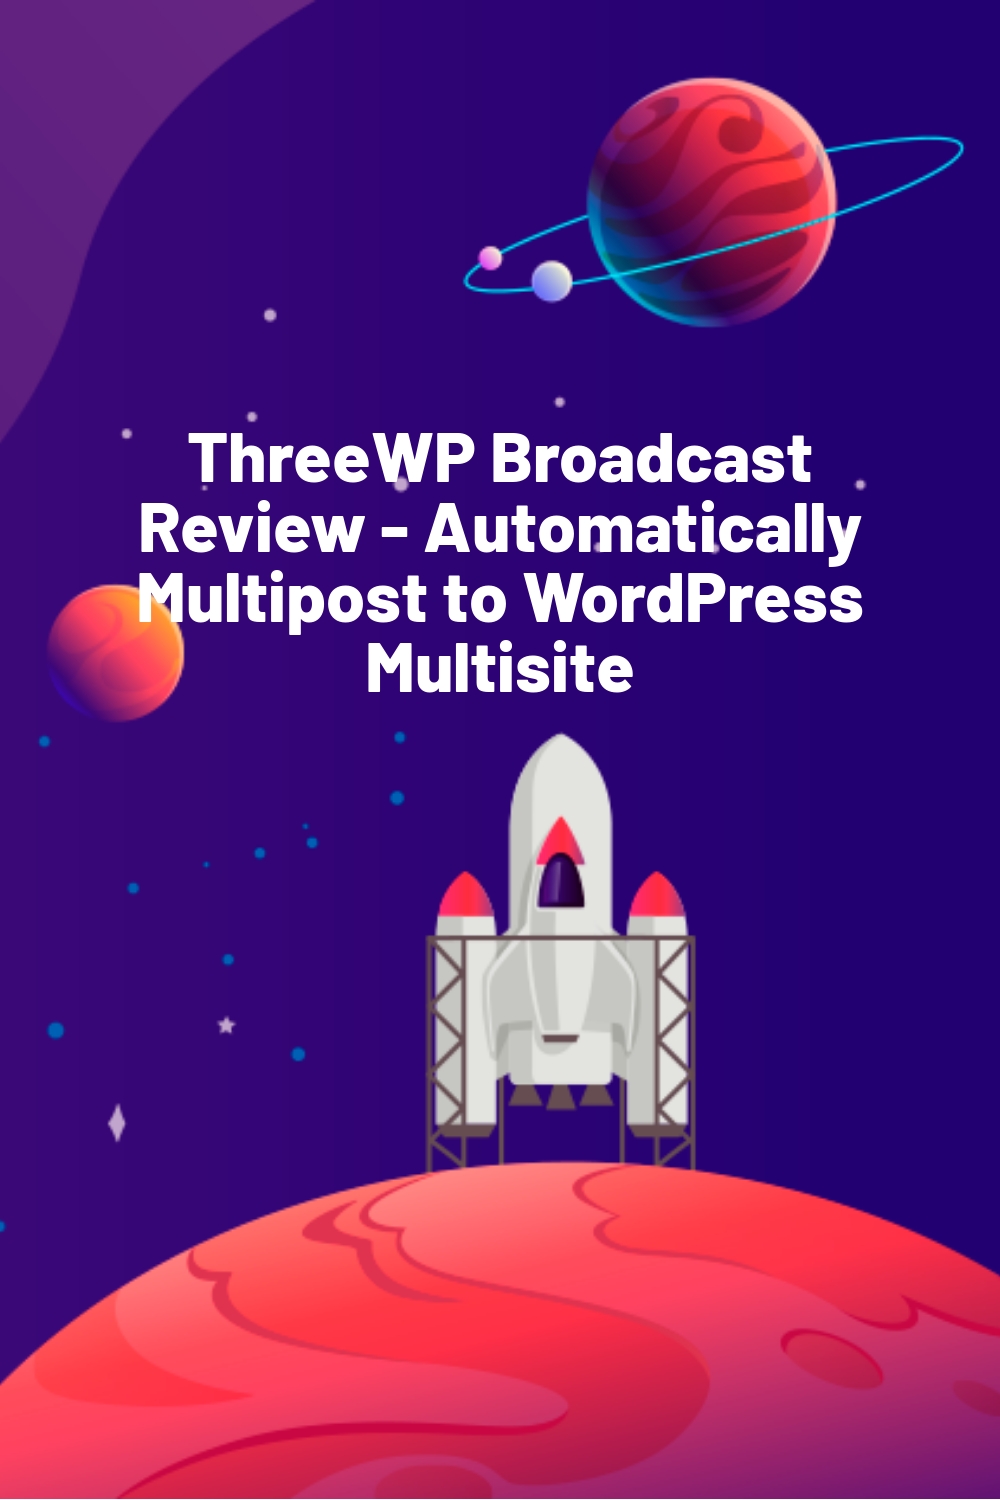 ThreeWP Broadcast Review – Automatically Multipost to WordPress Multisite